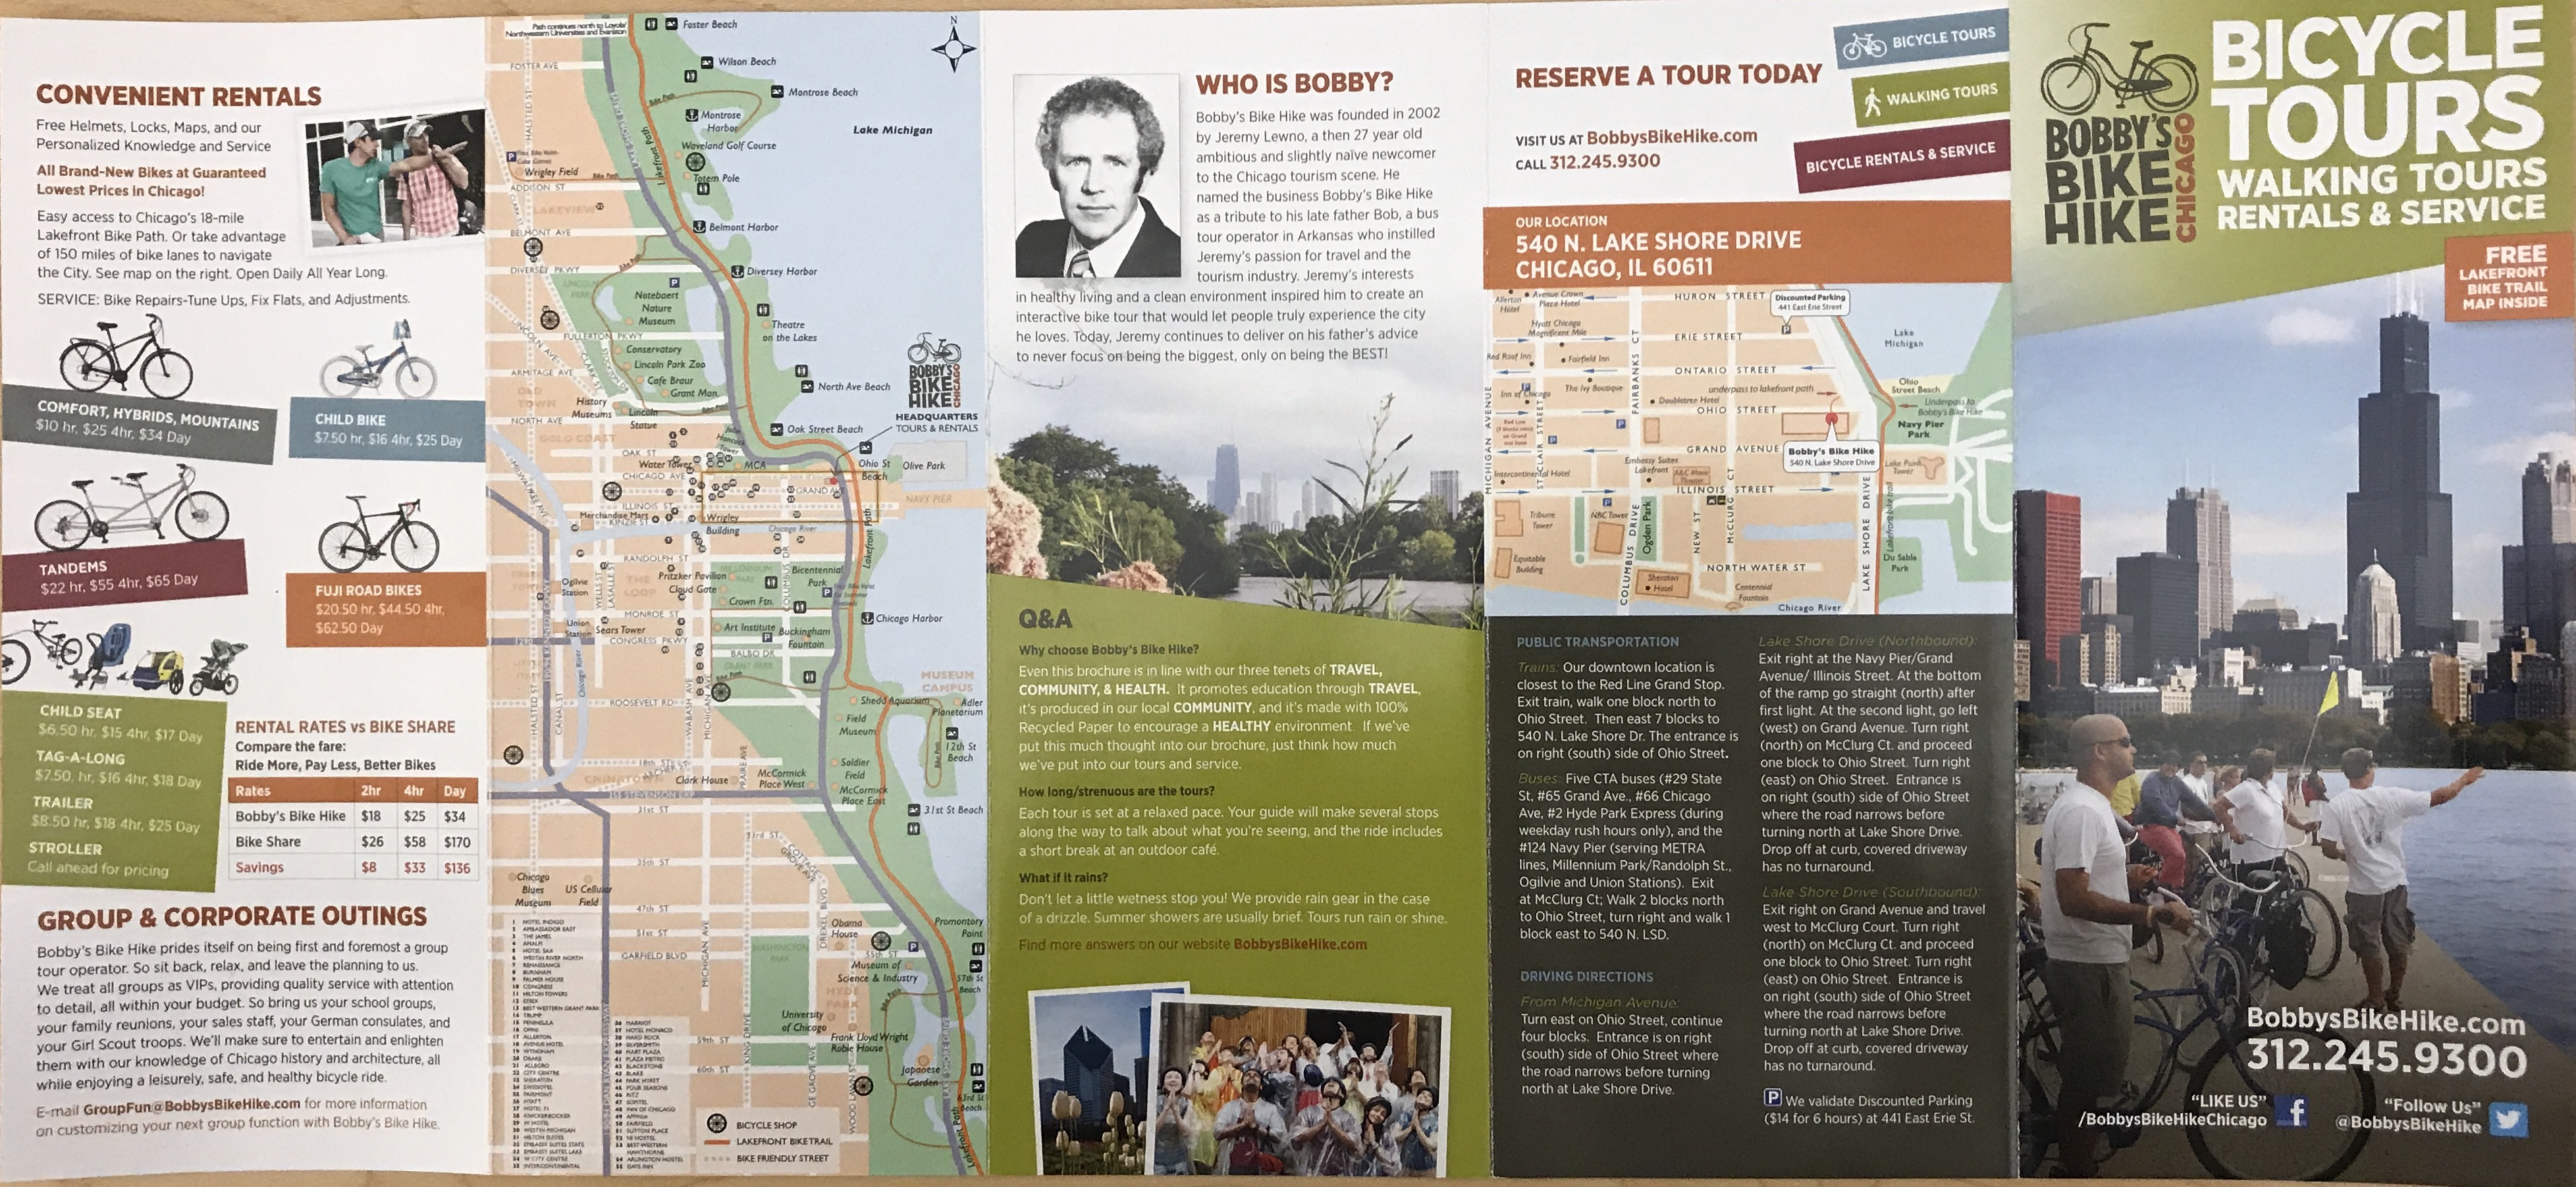 Chicago bike tours information pamplet 1